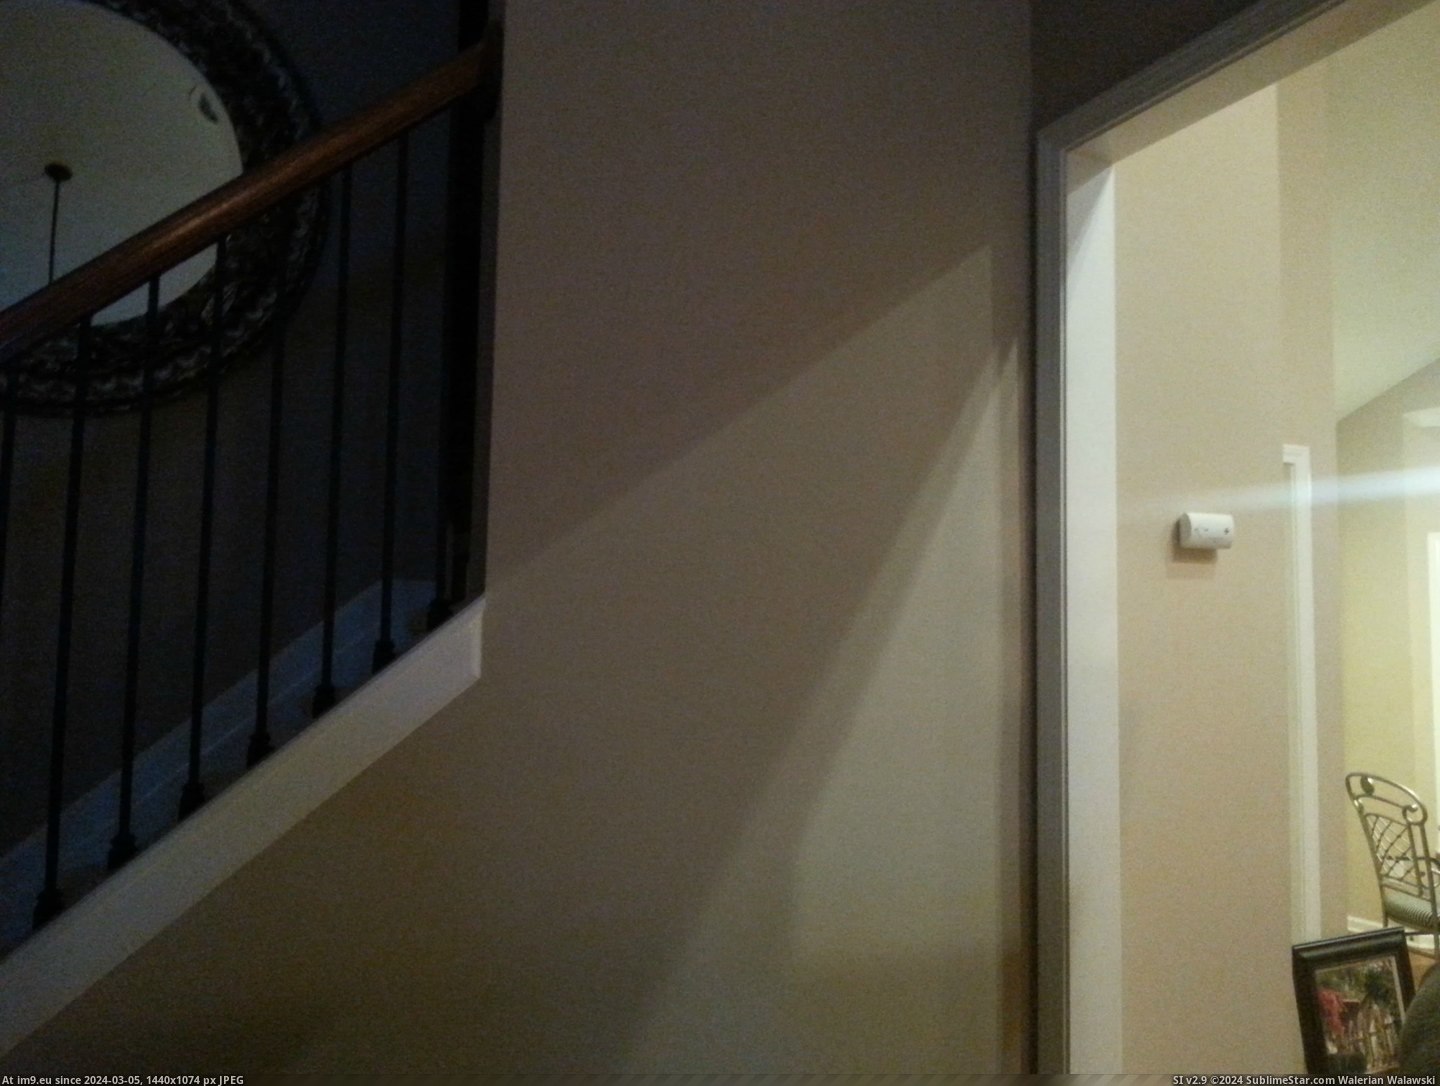 #Lines #Light #Baseboard #Stairs #Doorway [Mildlyinteresting] The light from the doorway lines up with the baseboard of the stairs Pic. (Bild von album My r/MILDLYINTERESTING favs))